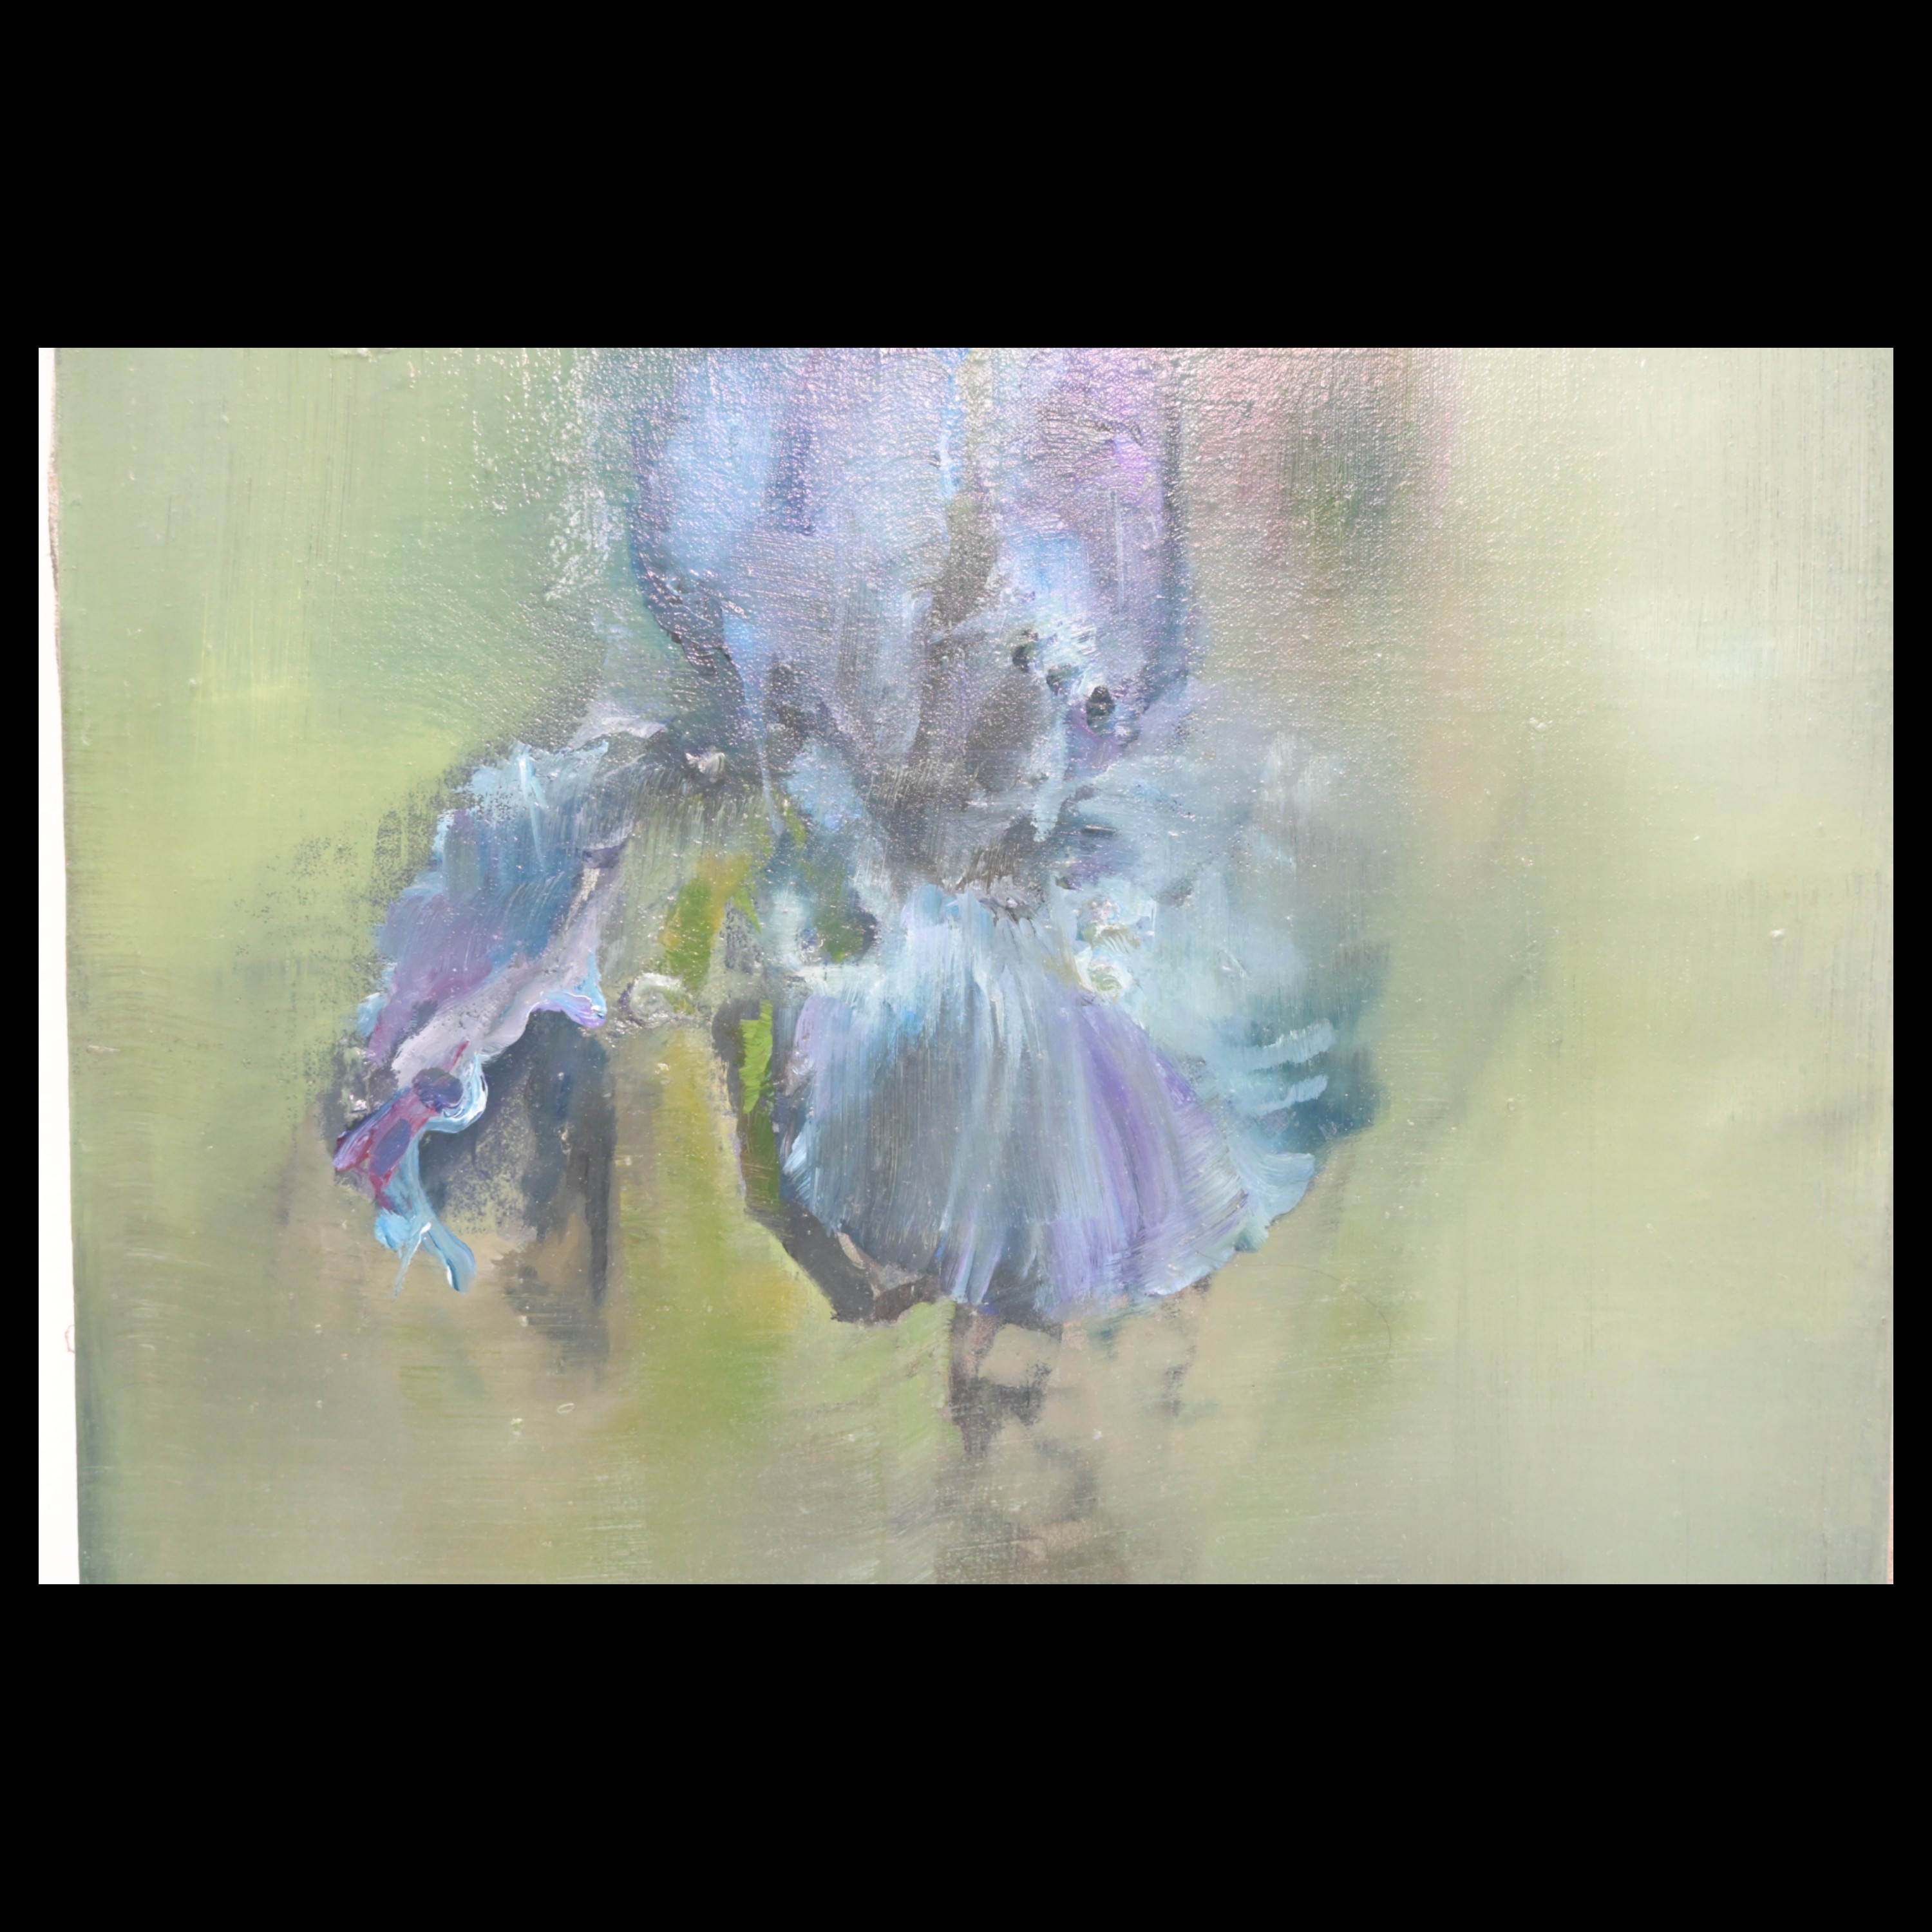 Clement ROSENTHAL (1956) iris flower on green background, oil on canvas, 2002. - Image 3 of 8